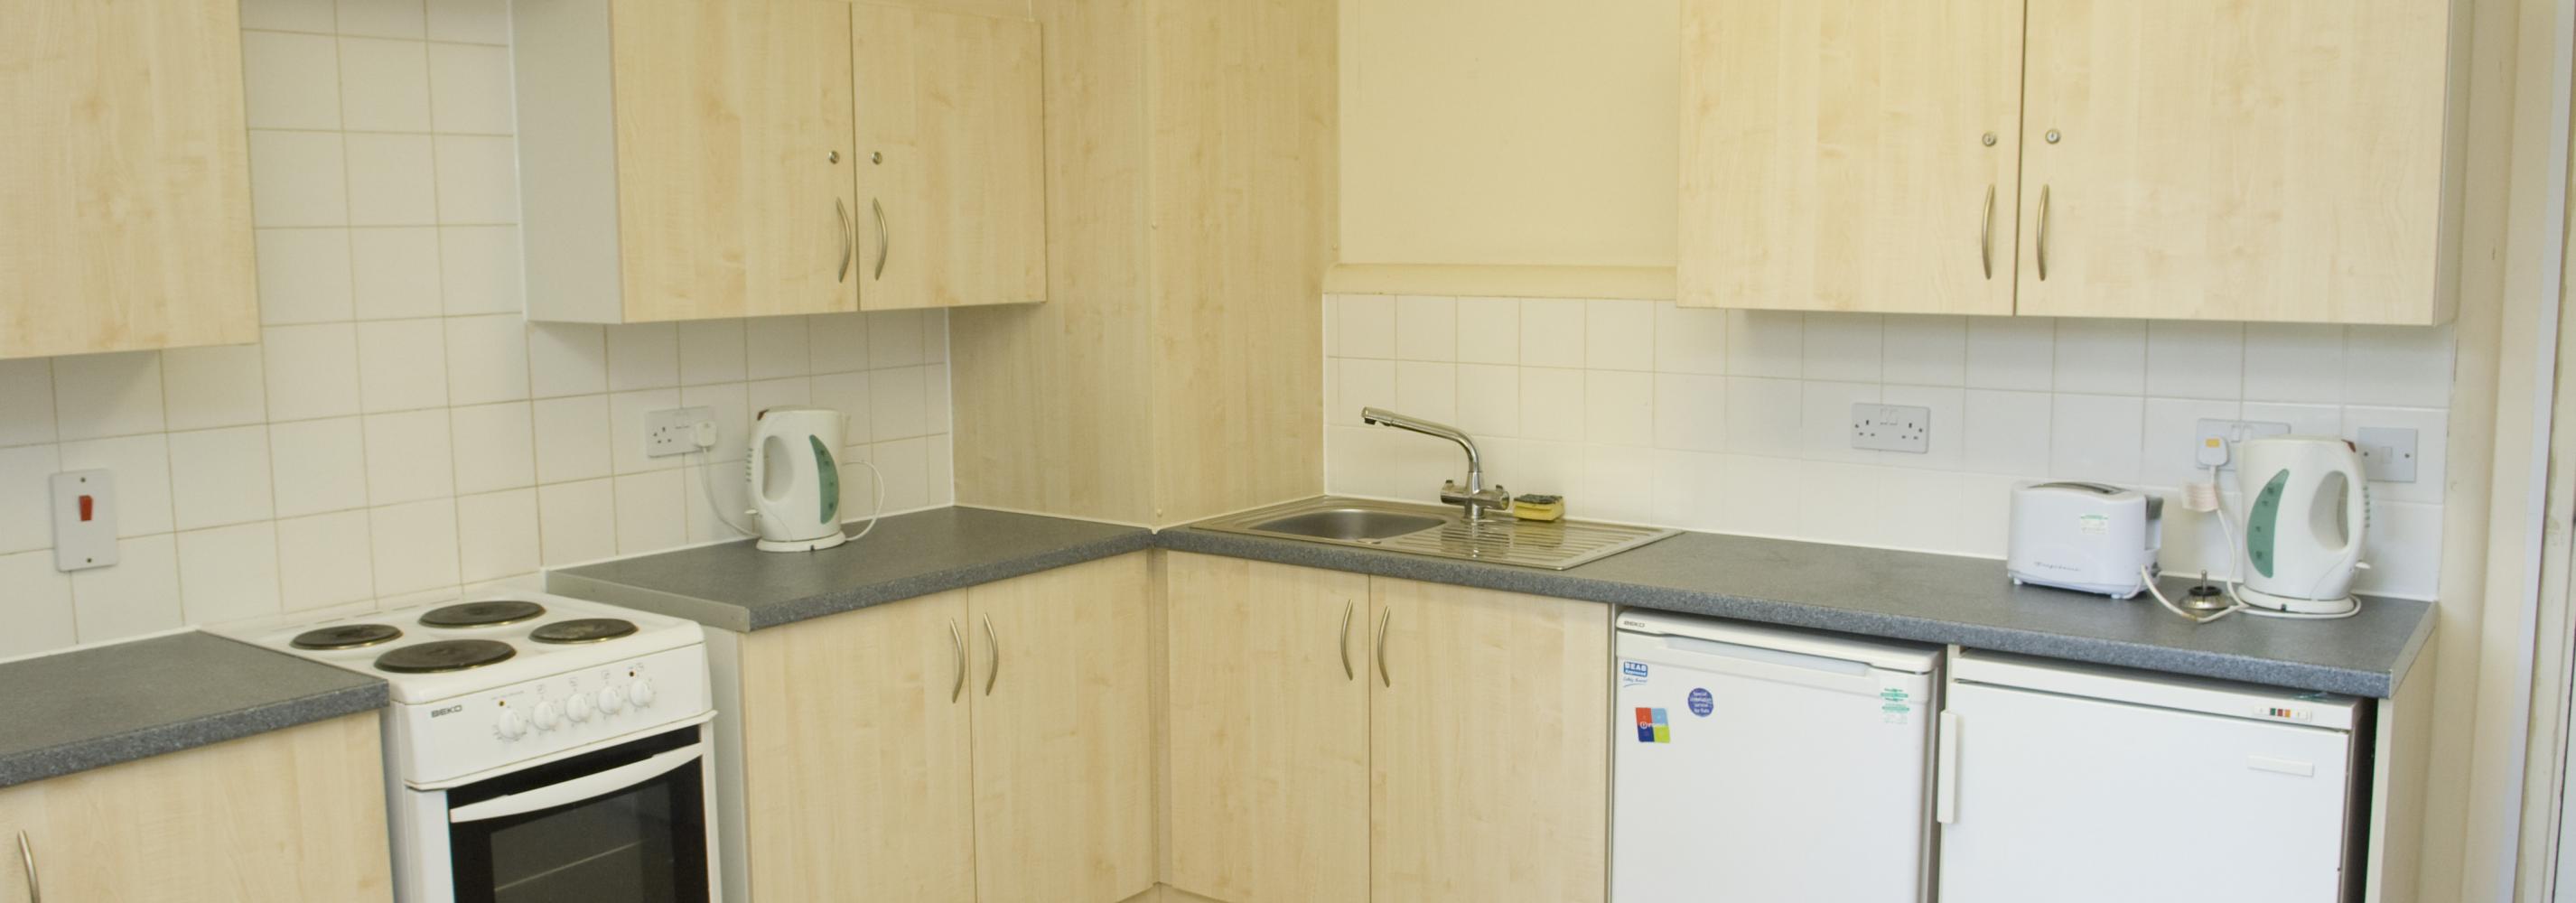 Kitchen with oven, hob and sink and fridge freezers